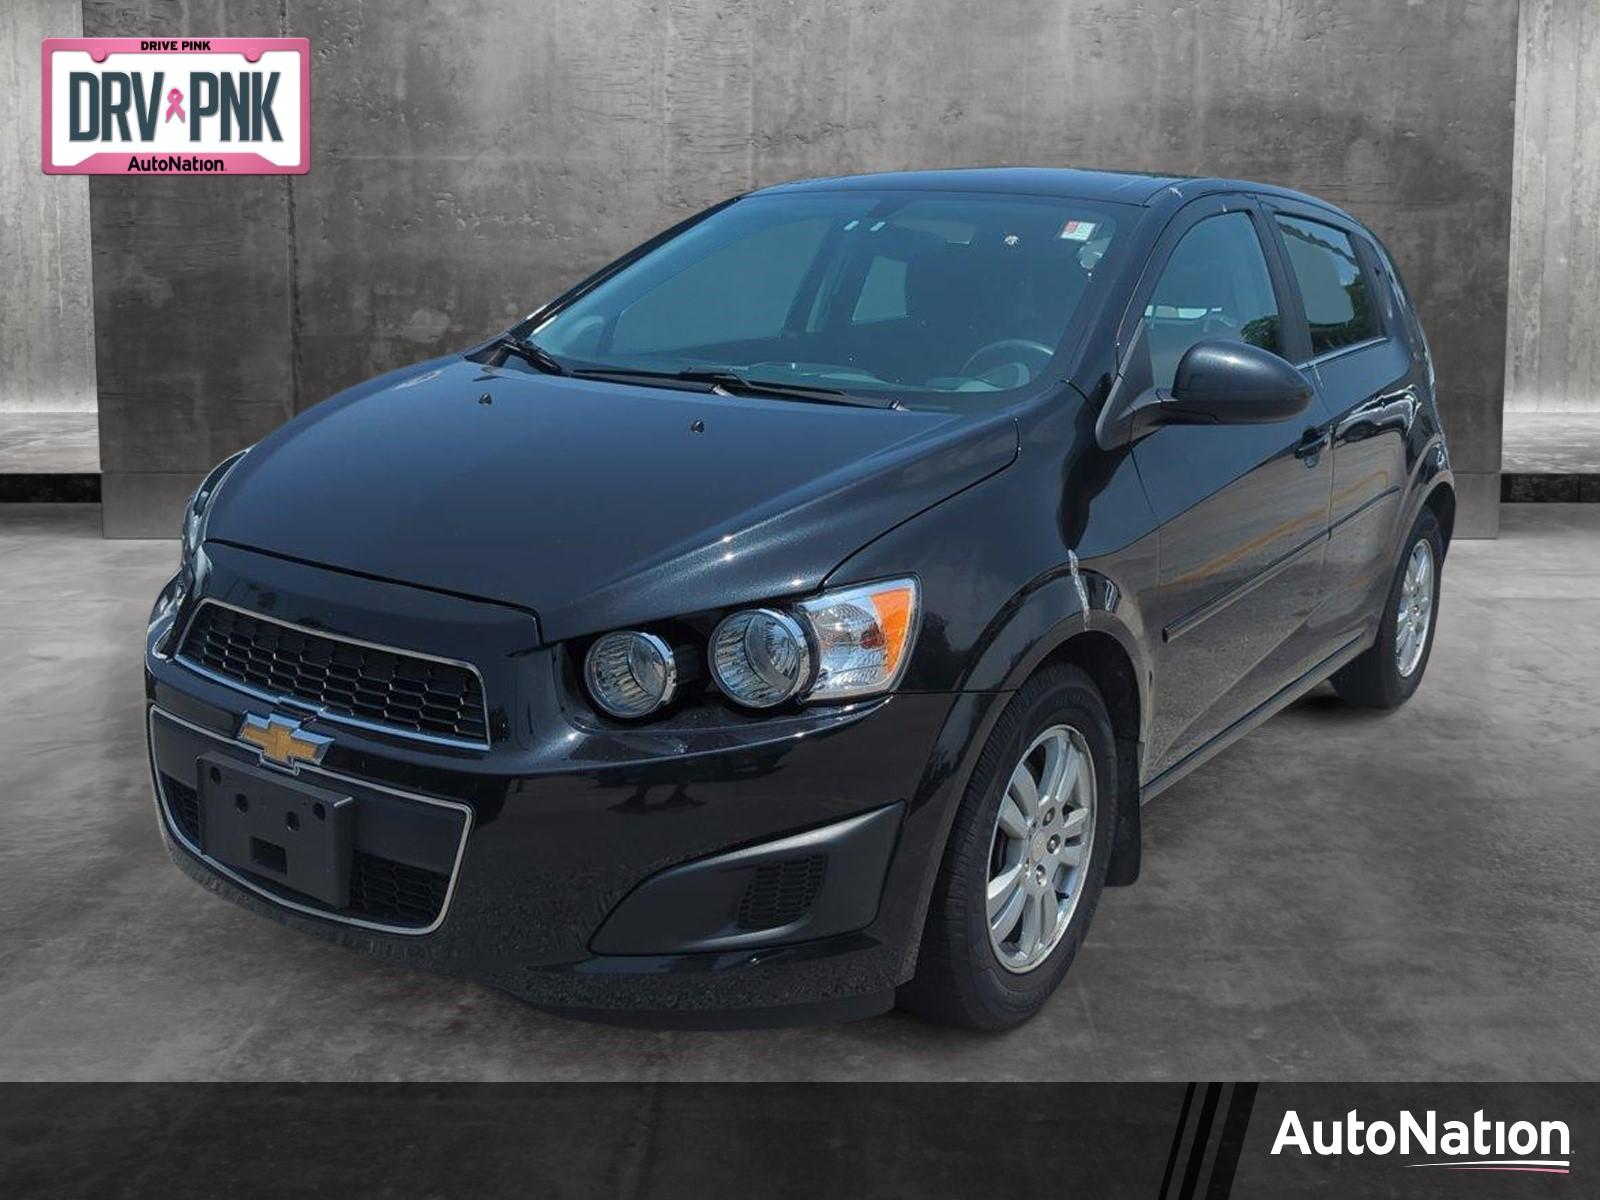 2015 Chevrolet Sonic Vehicle Photo in Clearwater, FL 33765